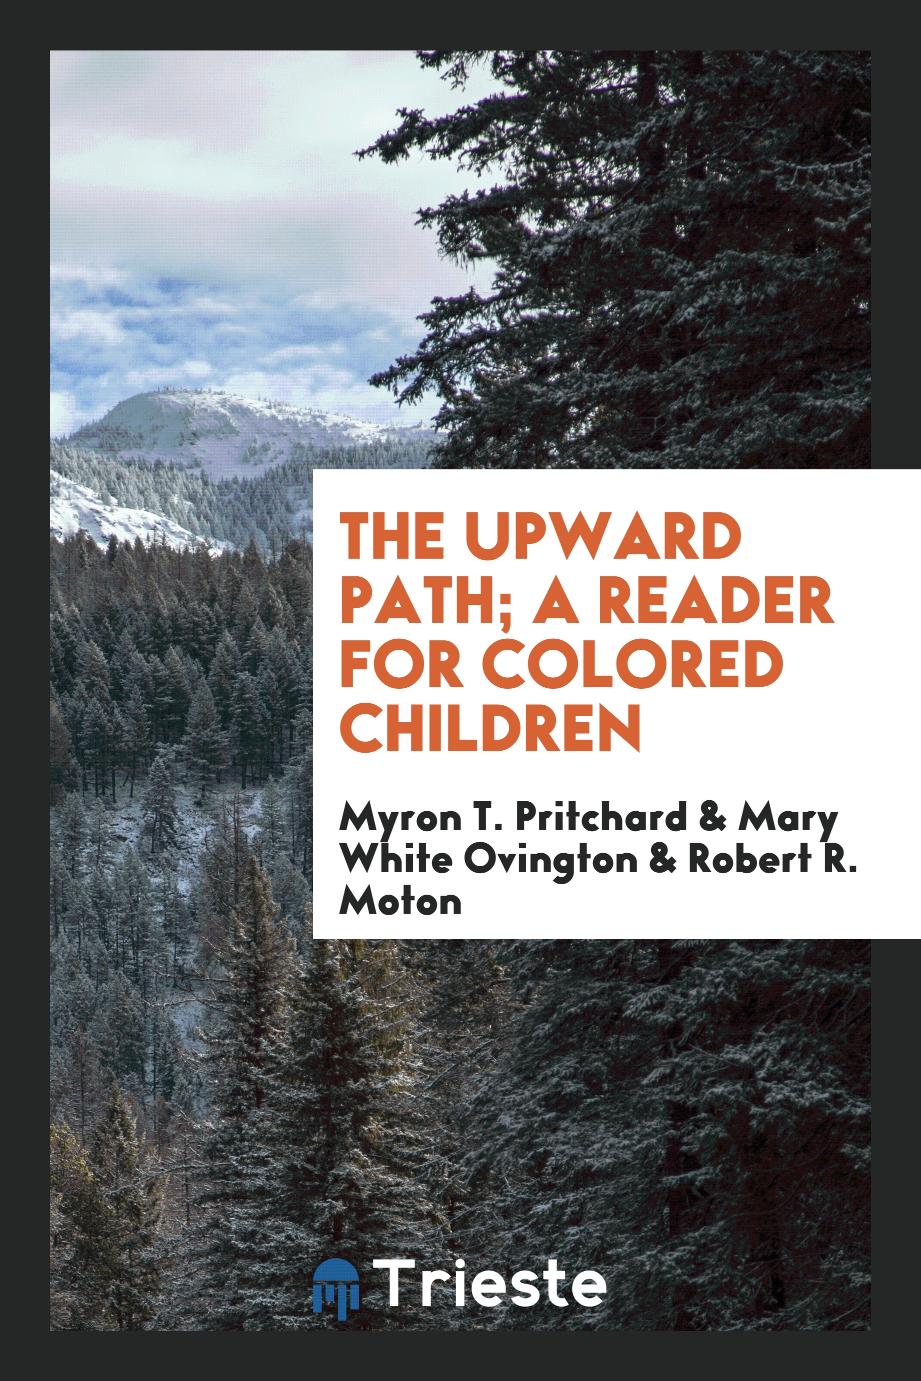 The upward path; a reader for colored children